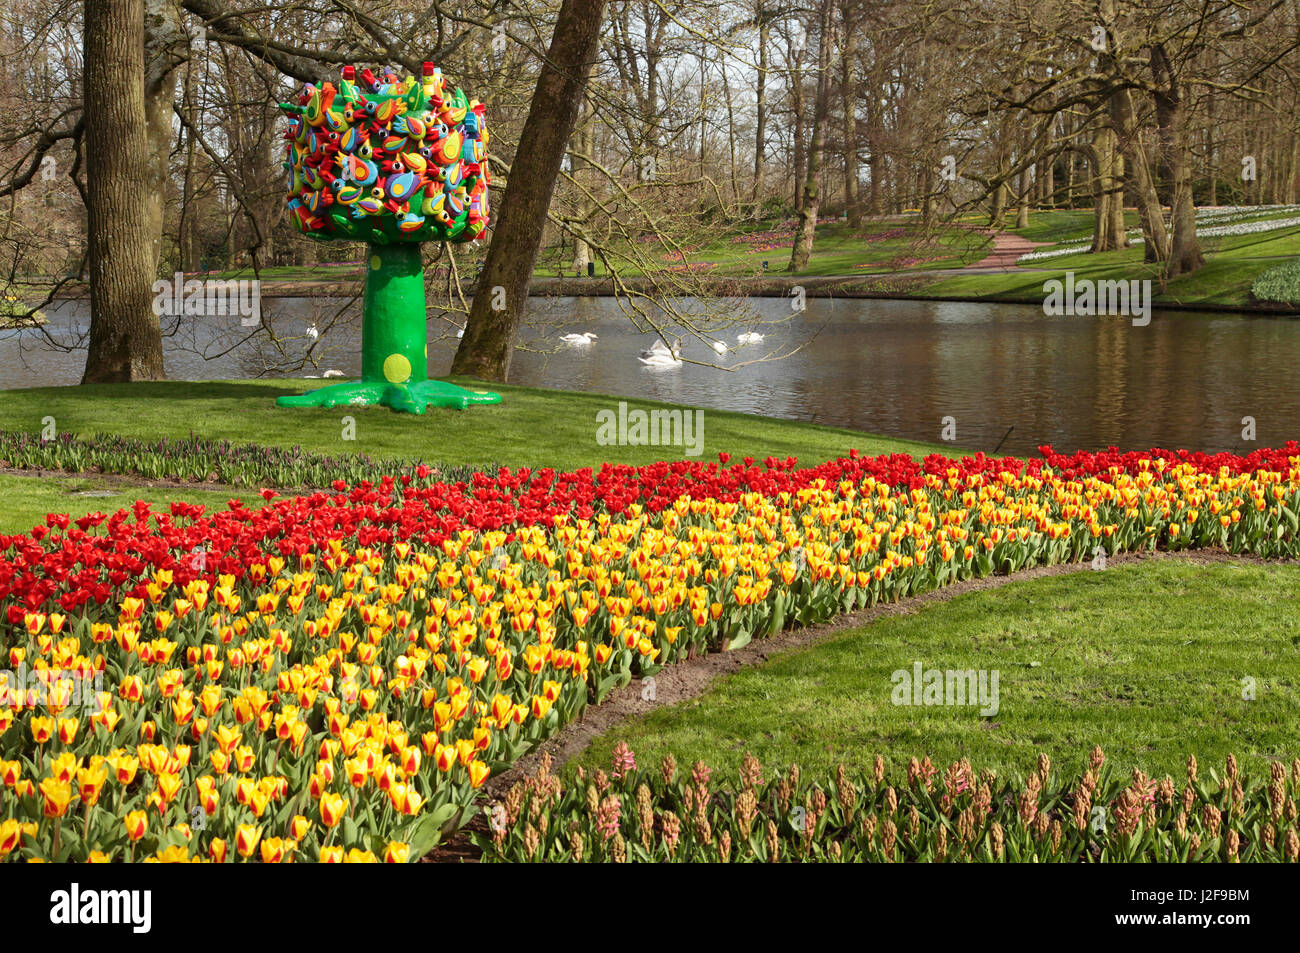 Garden architecture of the Keukenhof. Borders with colorful tulips and crocuses, a sculpture and a pond. Stock Photo